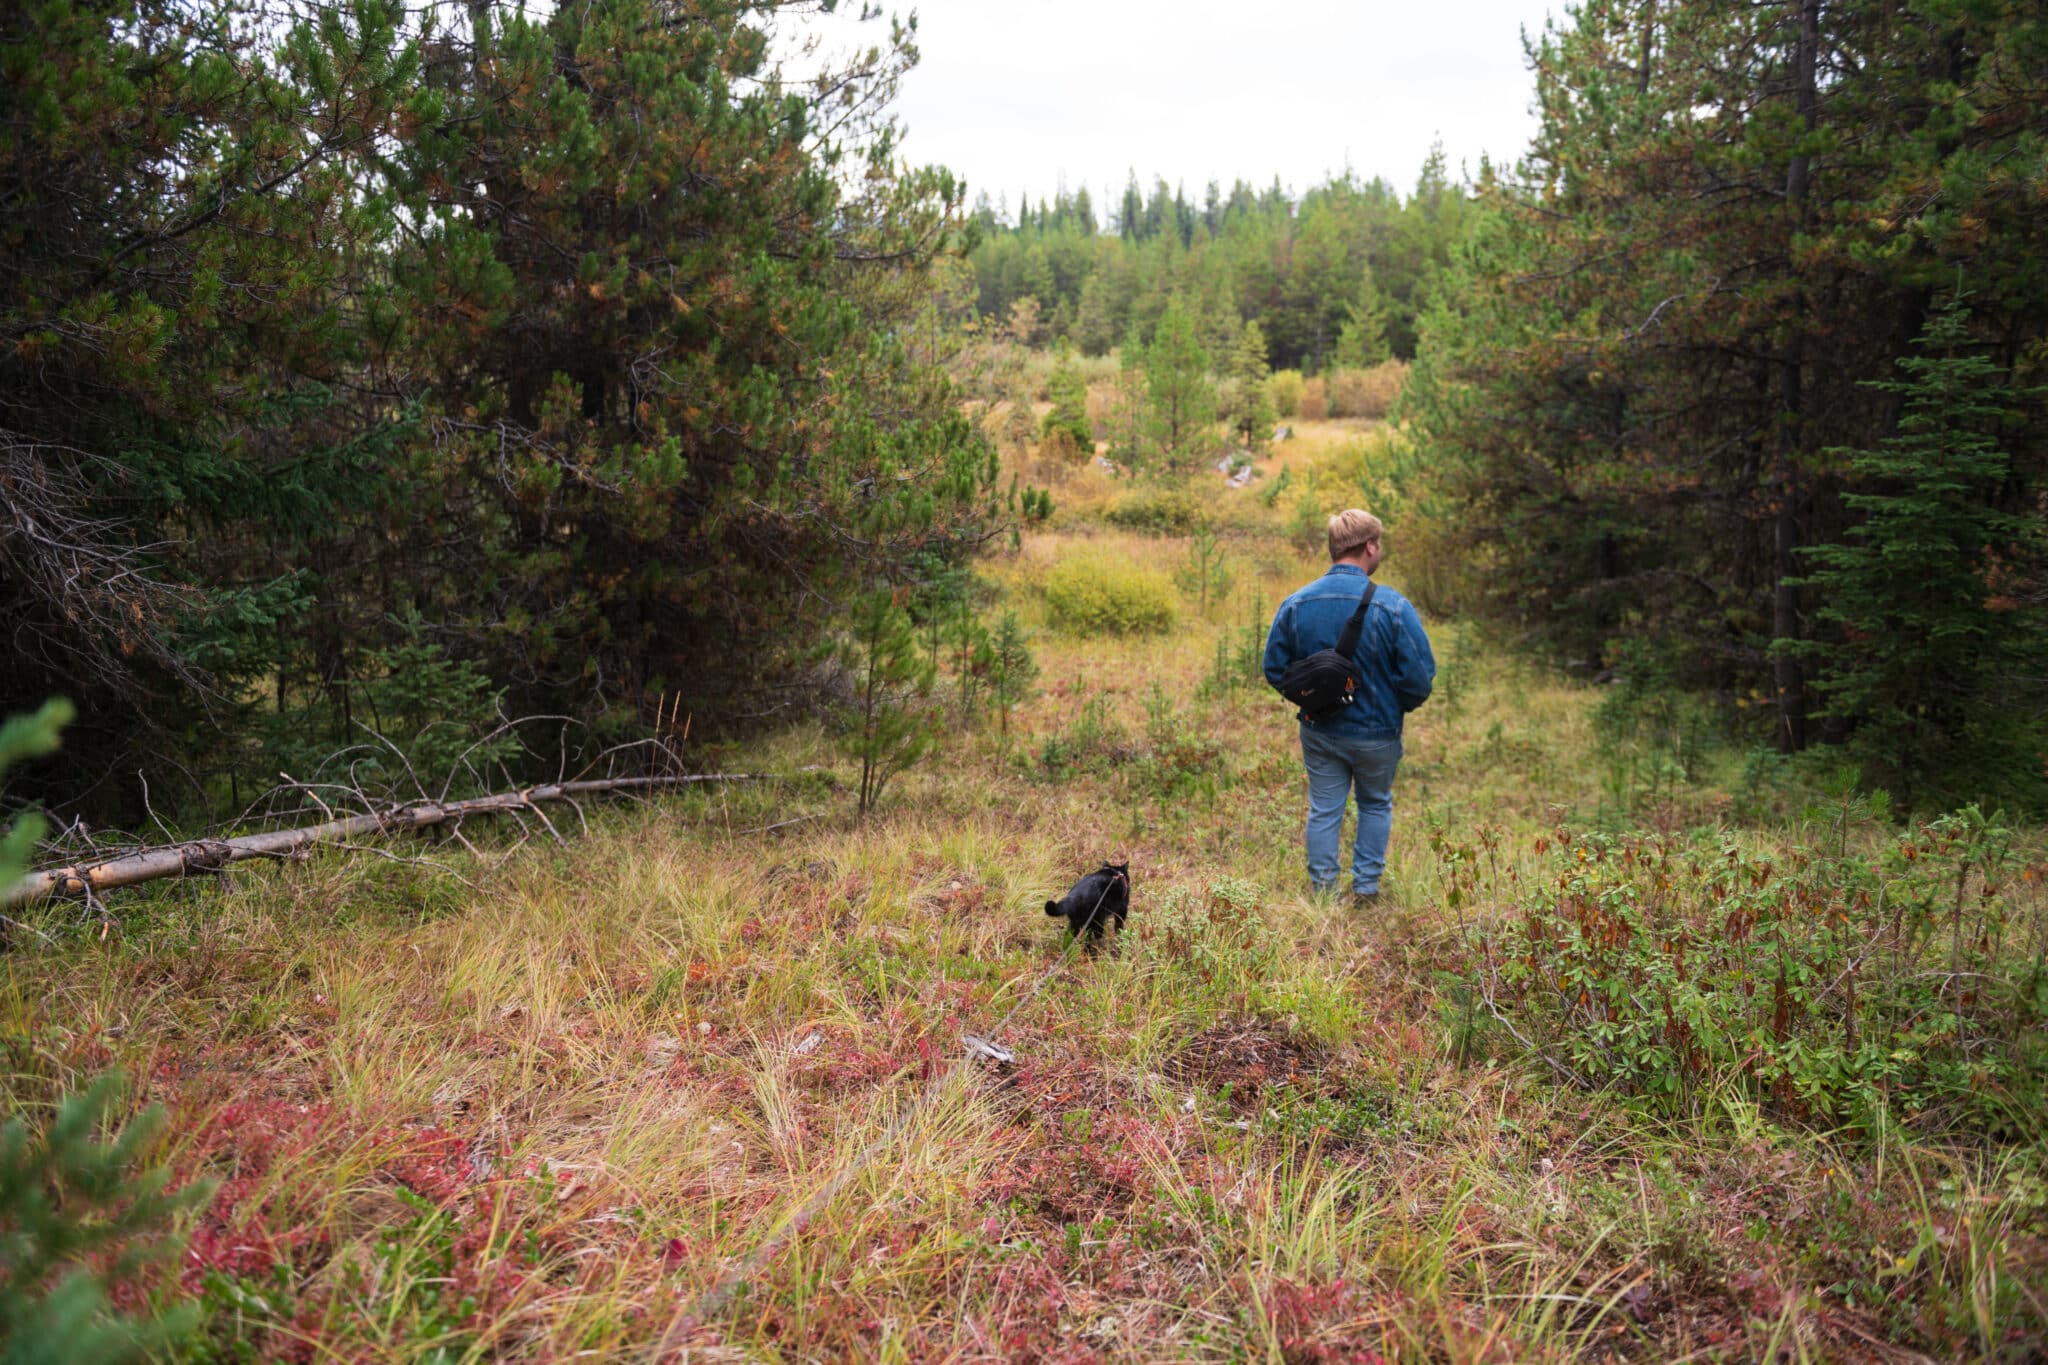 Man walking through a lush meadow. There is a kitty cat walking right behind him